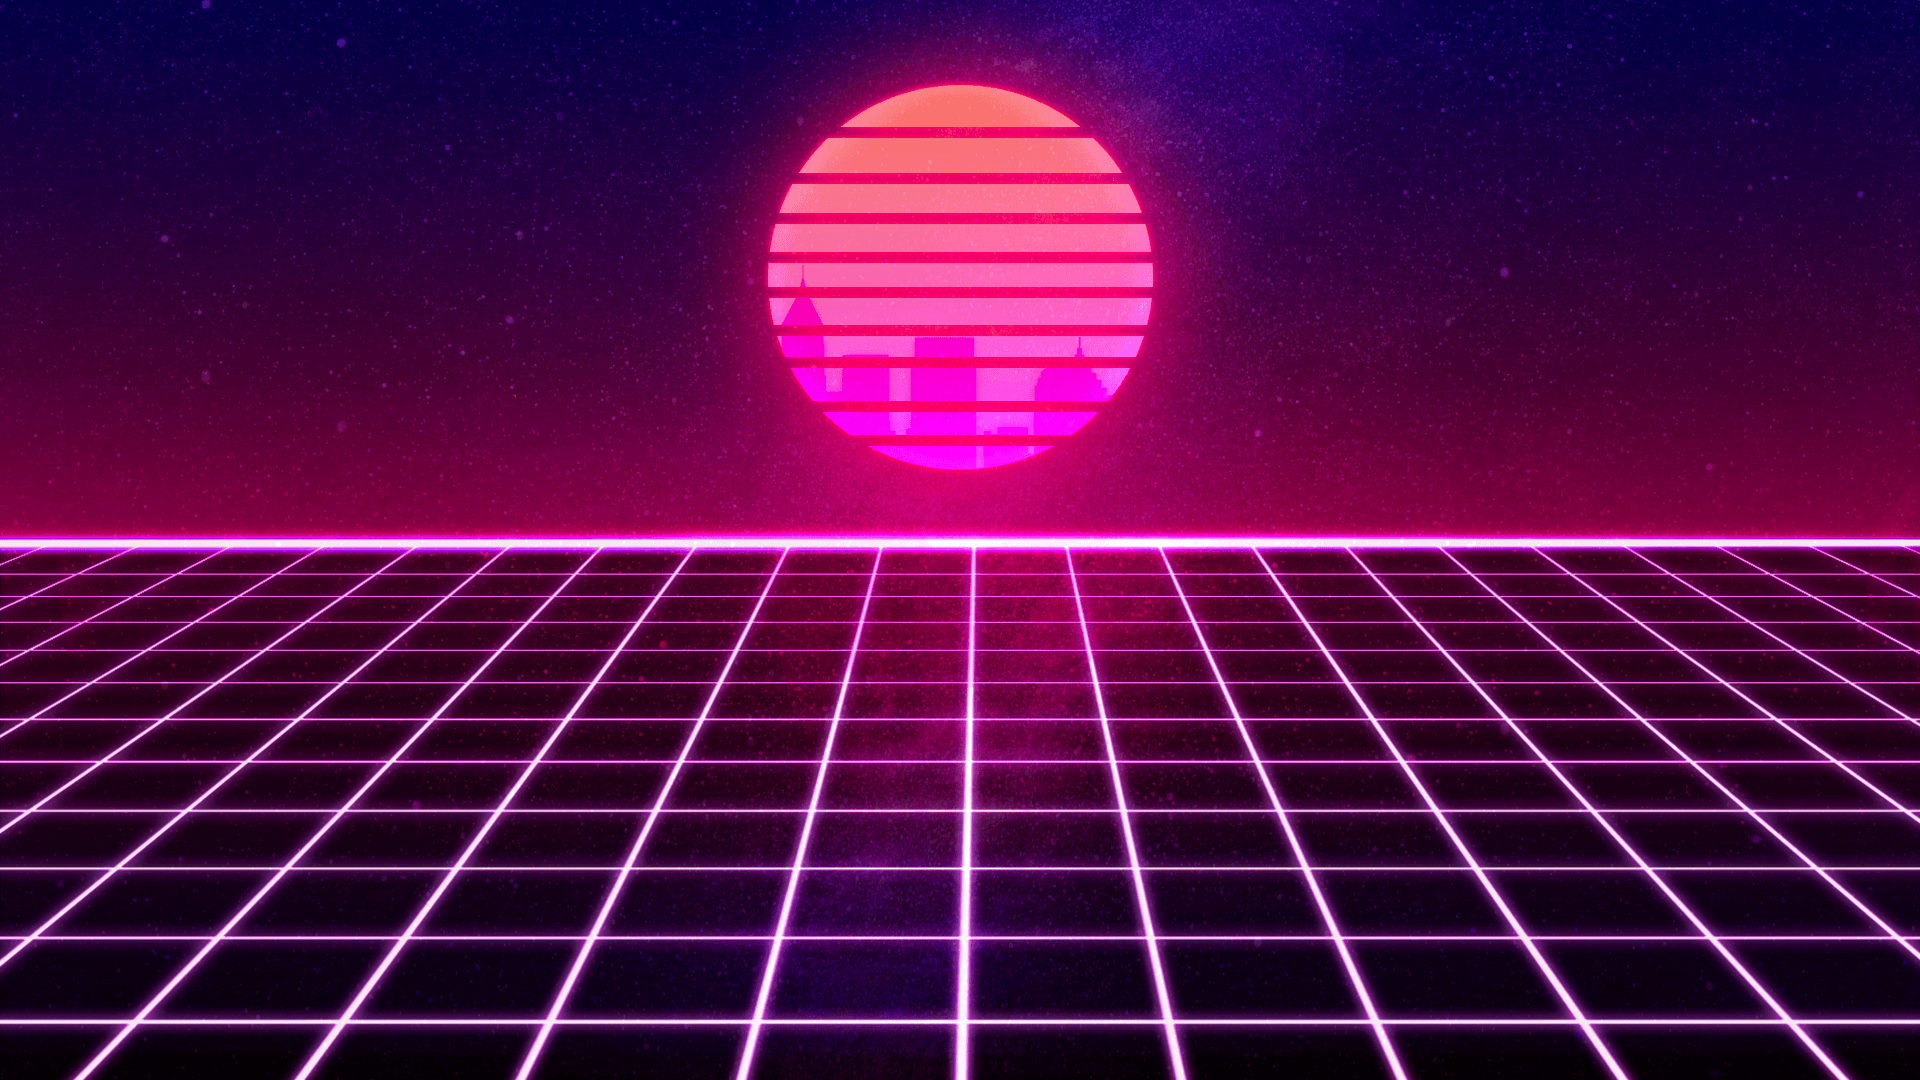 The 80s Wallpapers - Wallpaper Cave